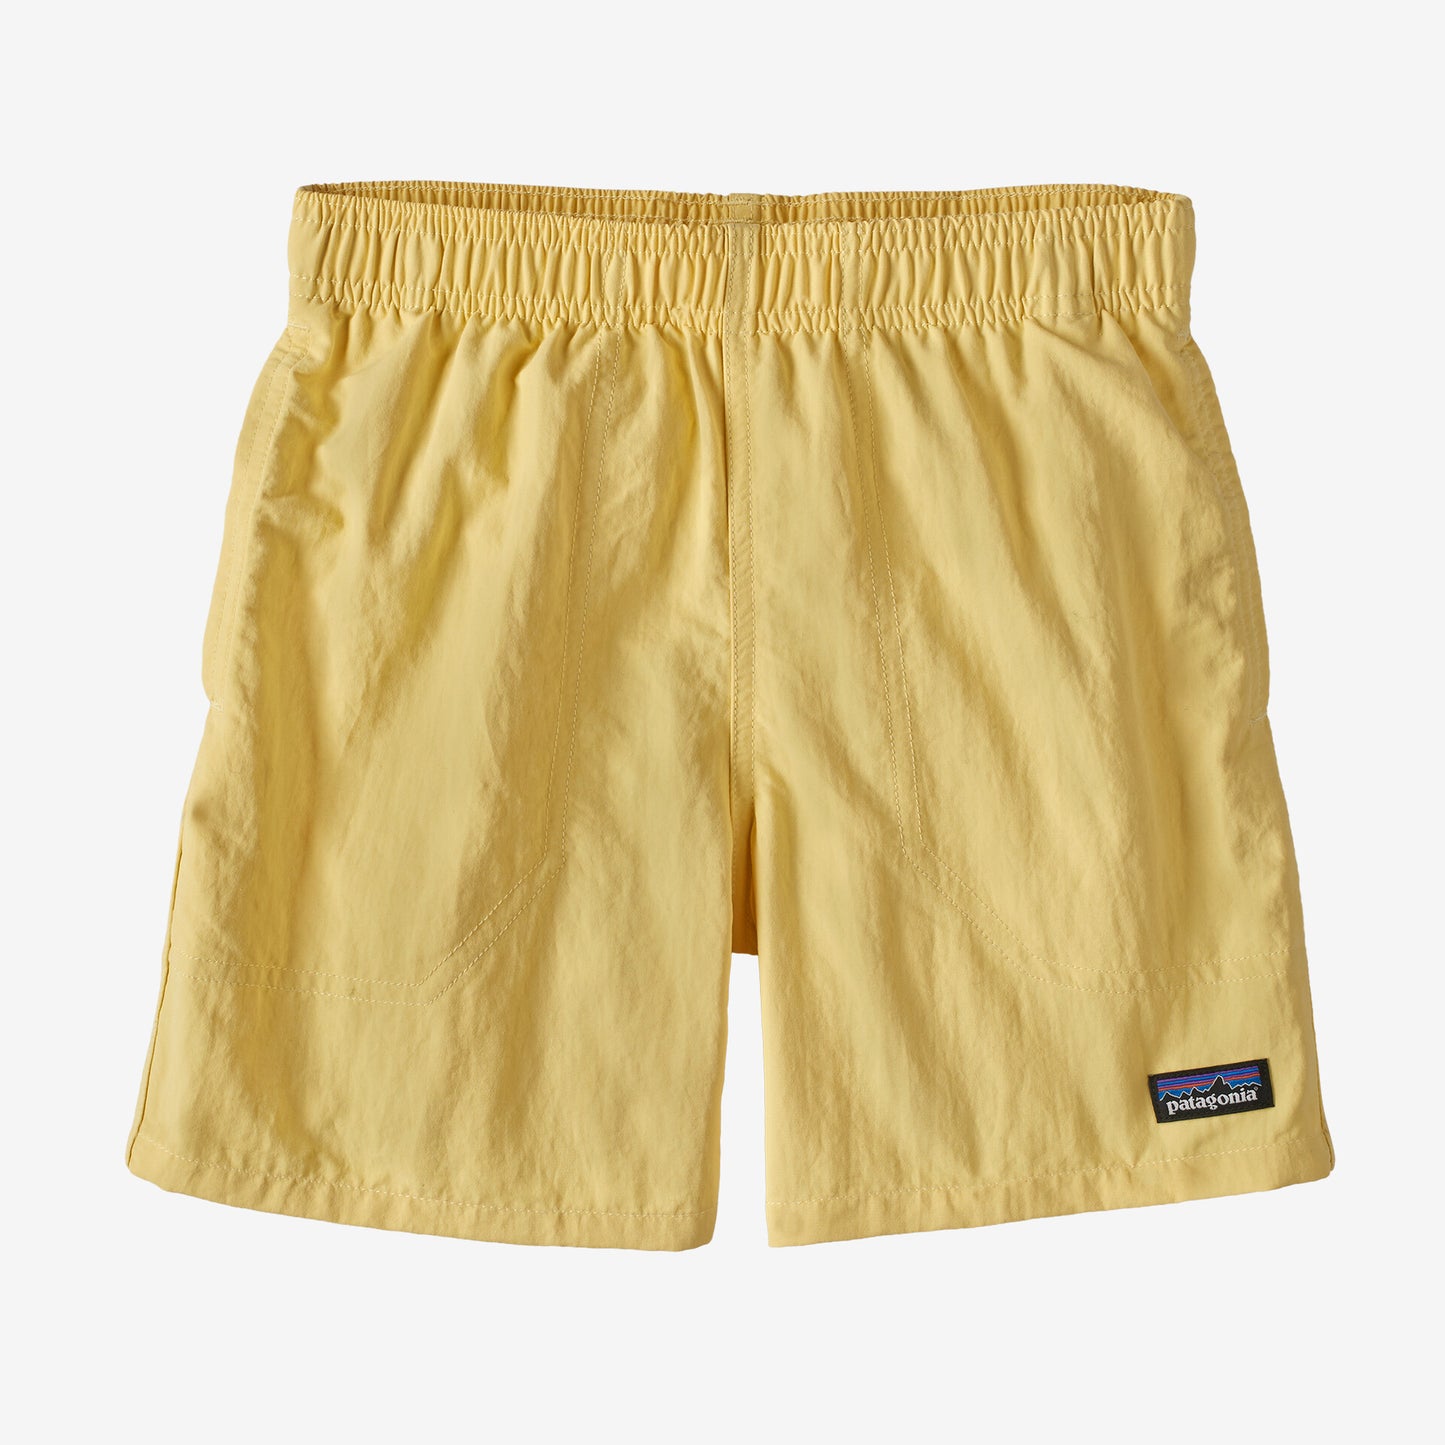 K's Baggies Shorts 5 in. - Lined